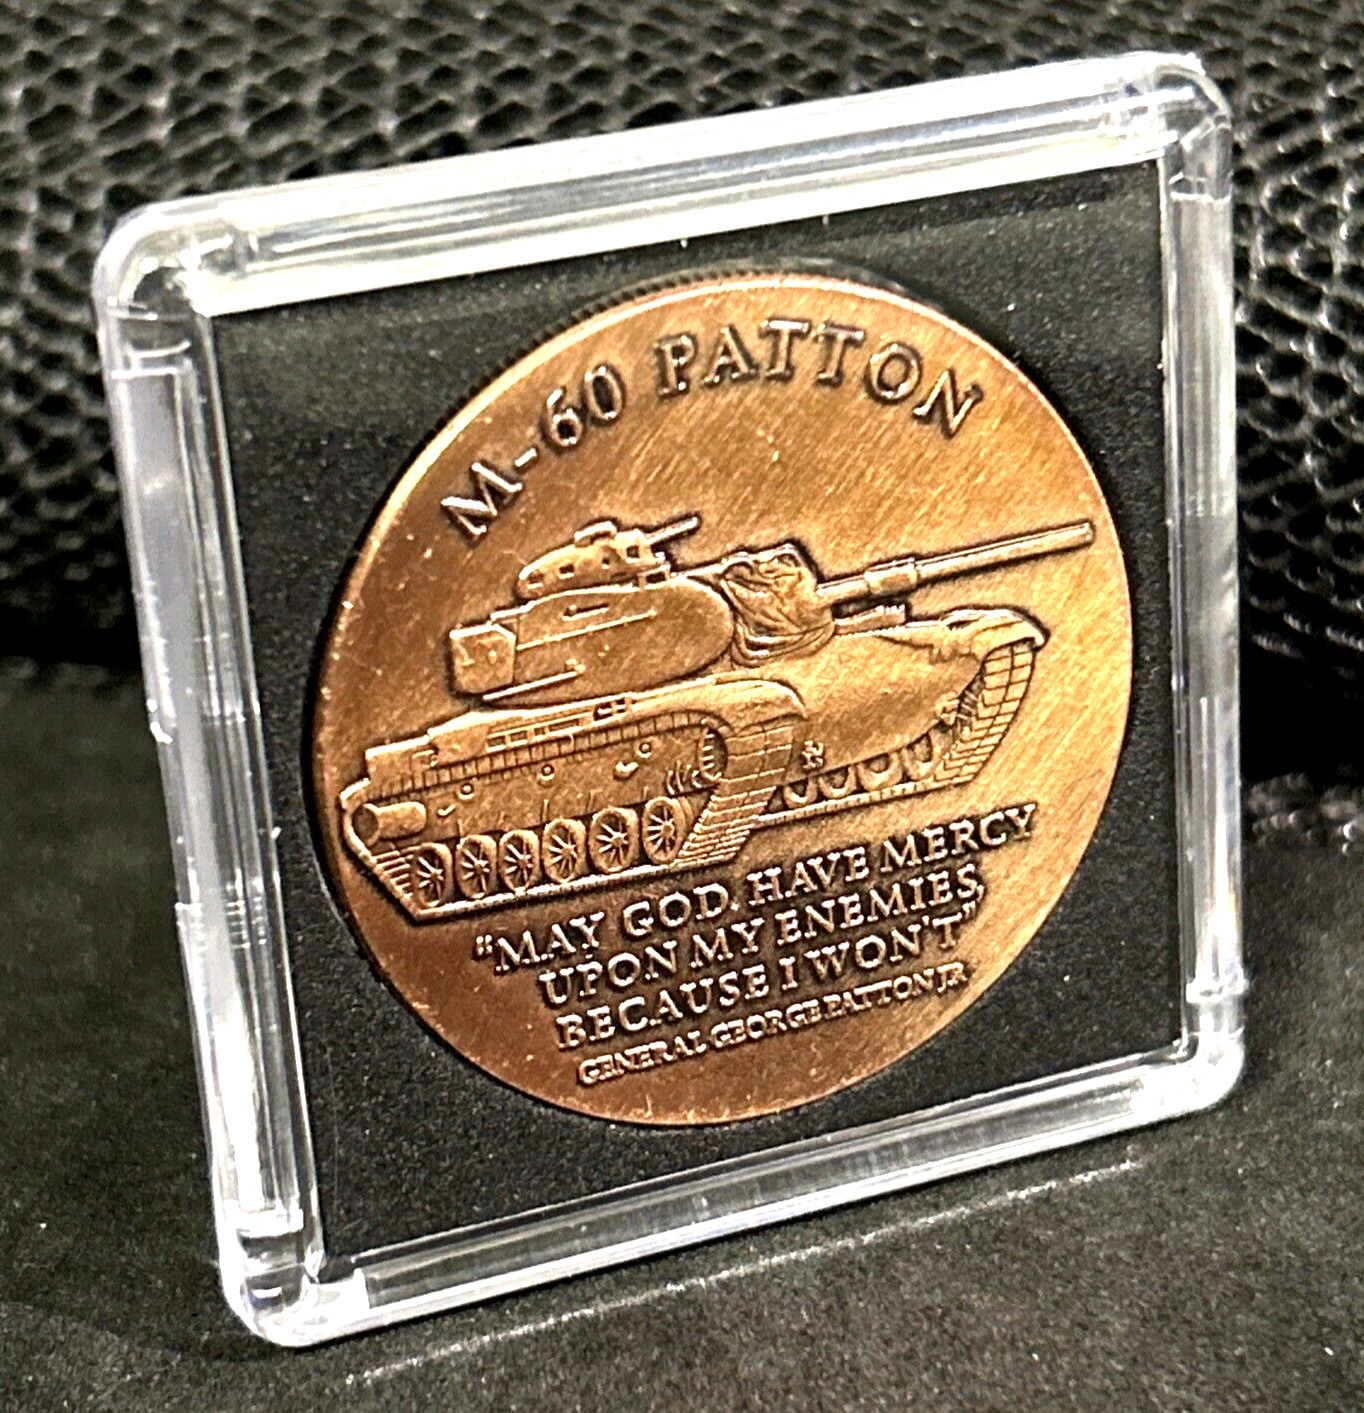 UNITED STATES ARMY M-60 Patton Tank Copper Challenge Coin-USA FAST SHIPPING